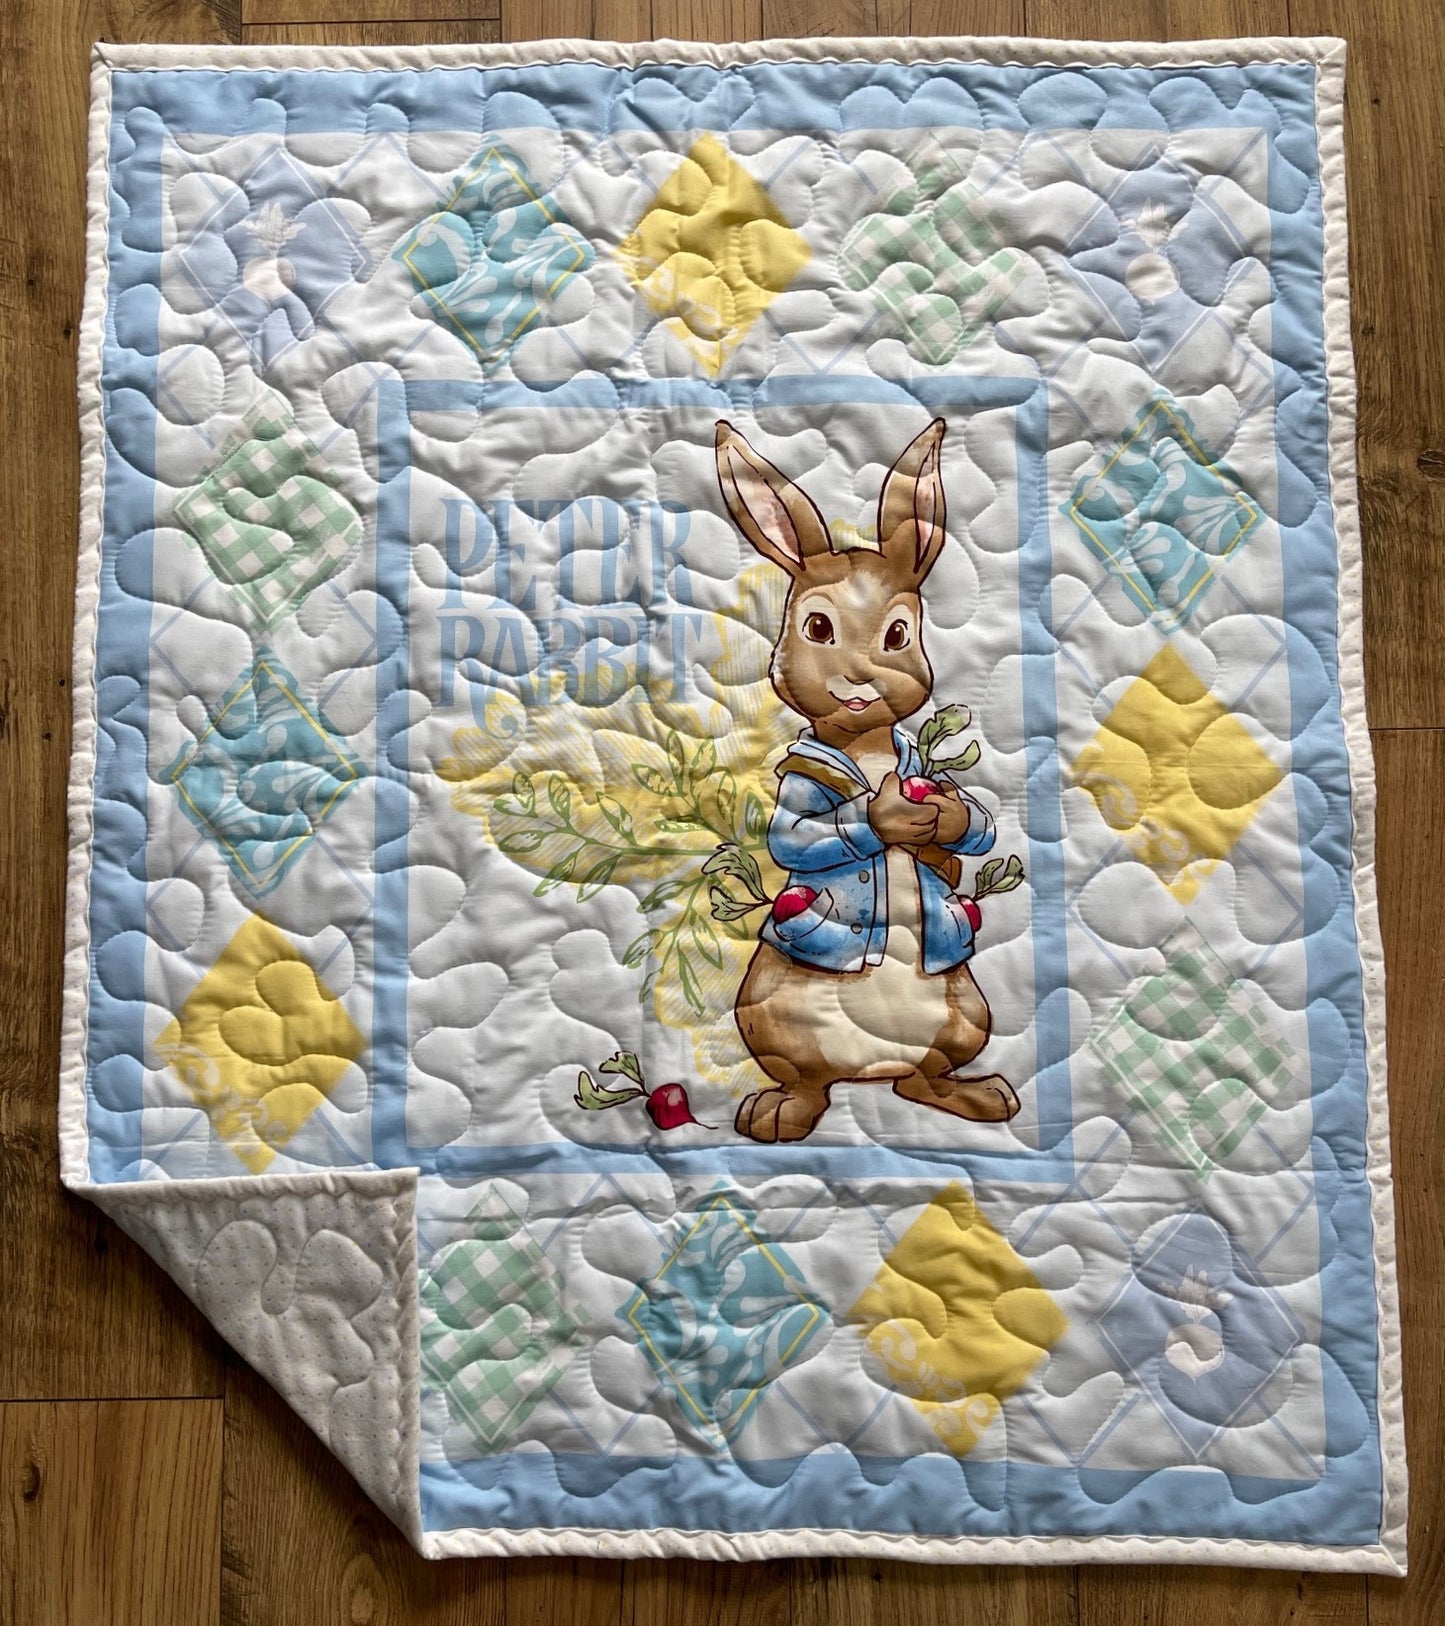 Peter Rabbit Quilted Blanket with soft flannel backing